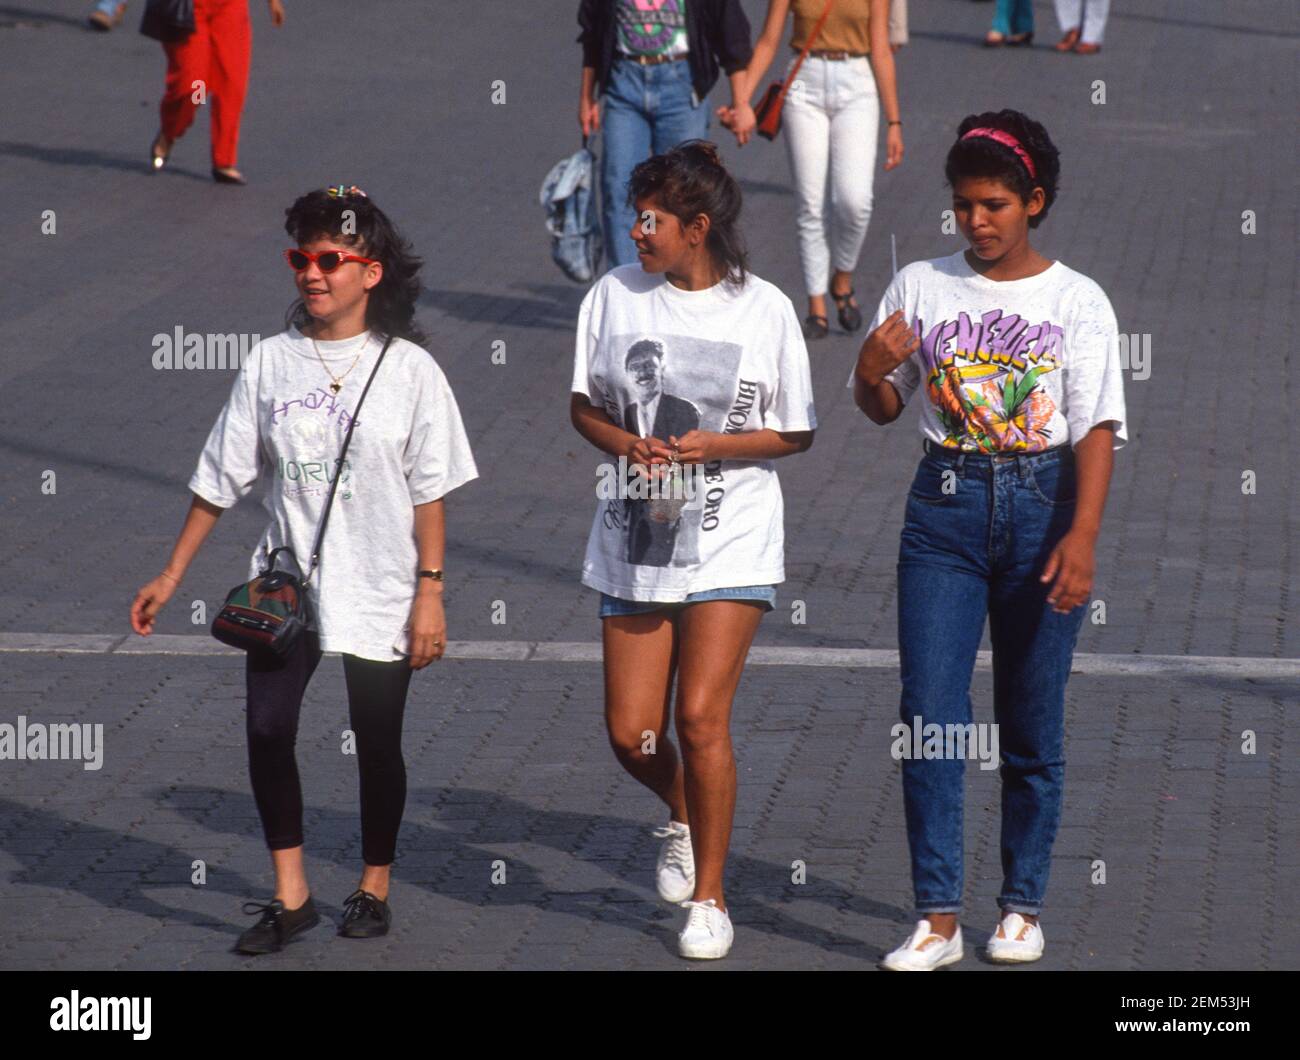 early 90s fashion